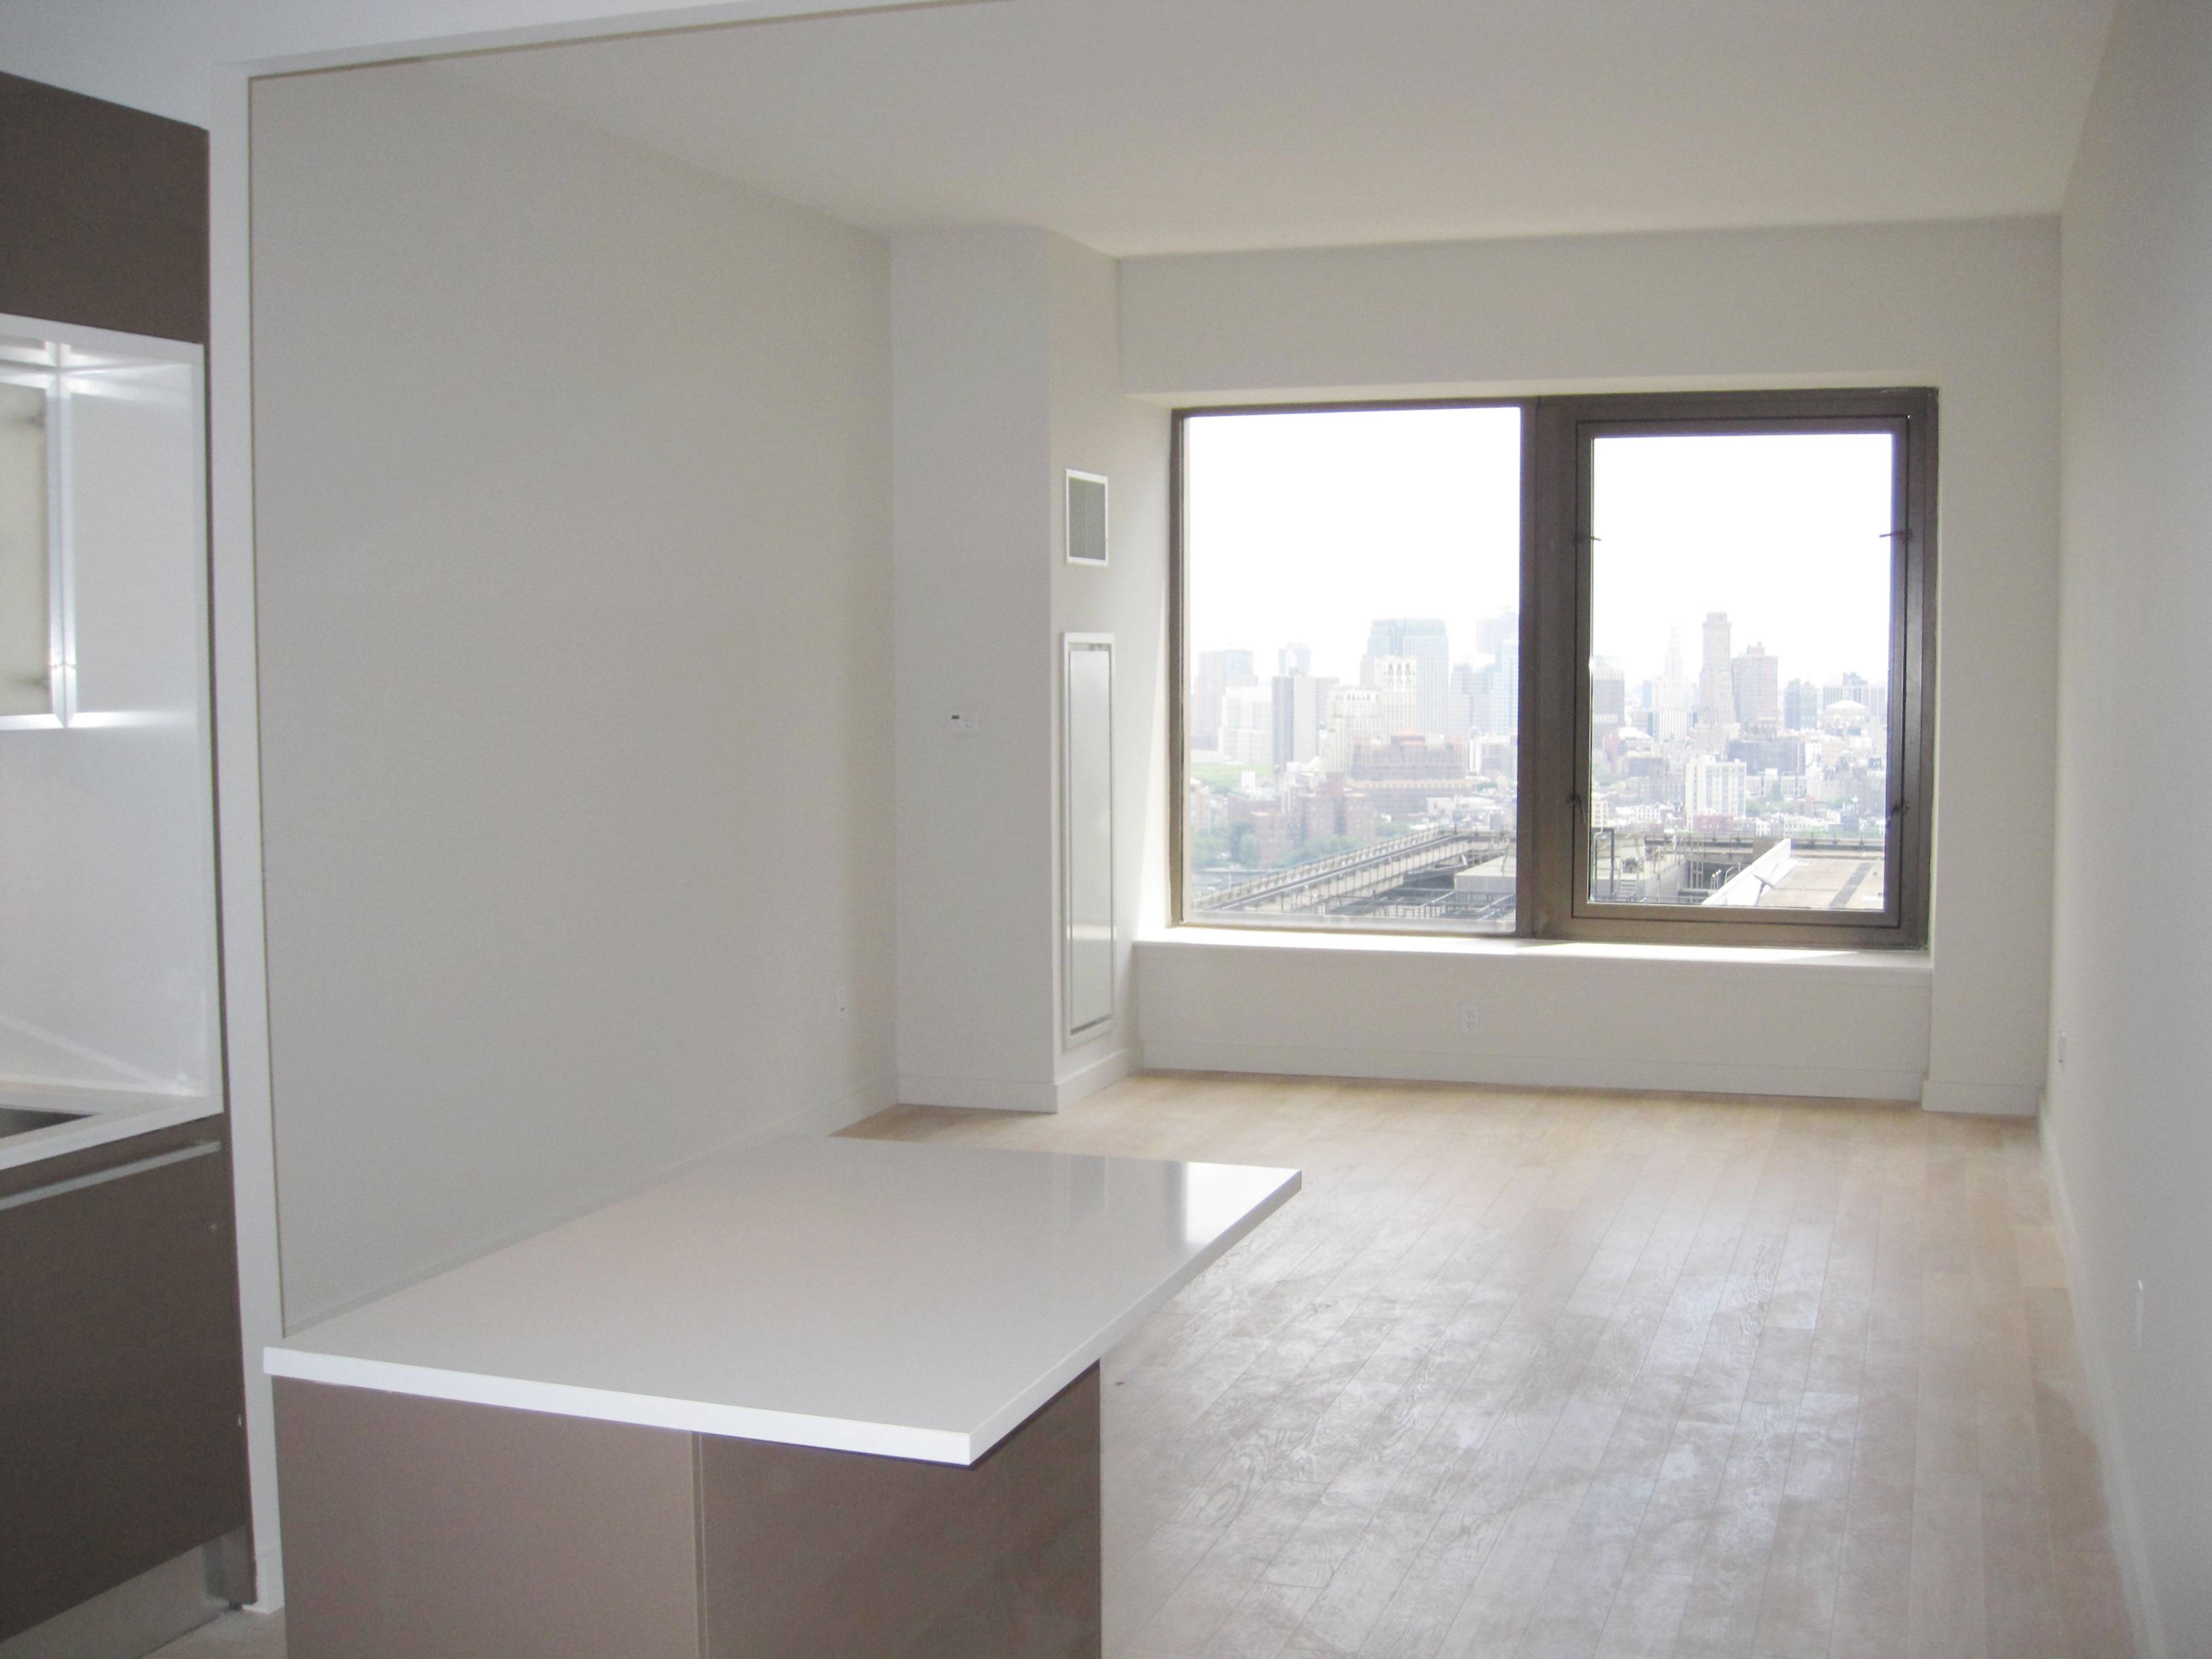 75 WALL STREET RENTALS: LAGRE CONVERTIBLE 1 BEDROOM LOFT - NO BOARD APPROVAL REQUIRED